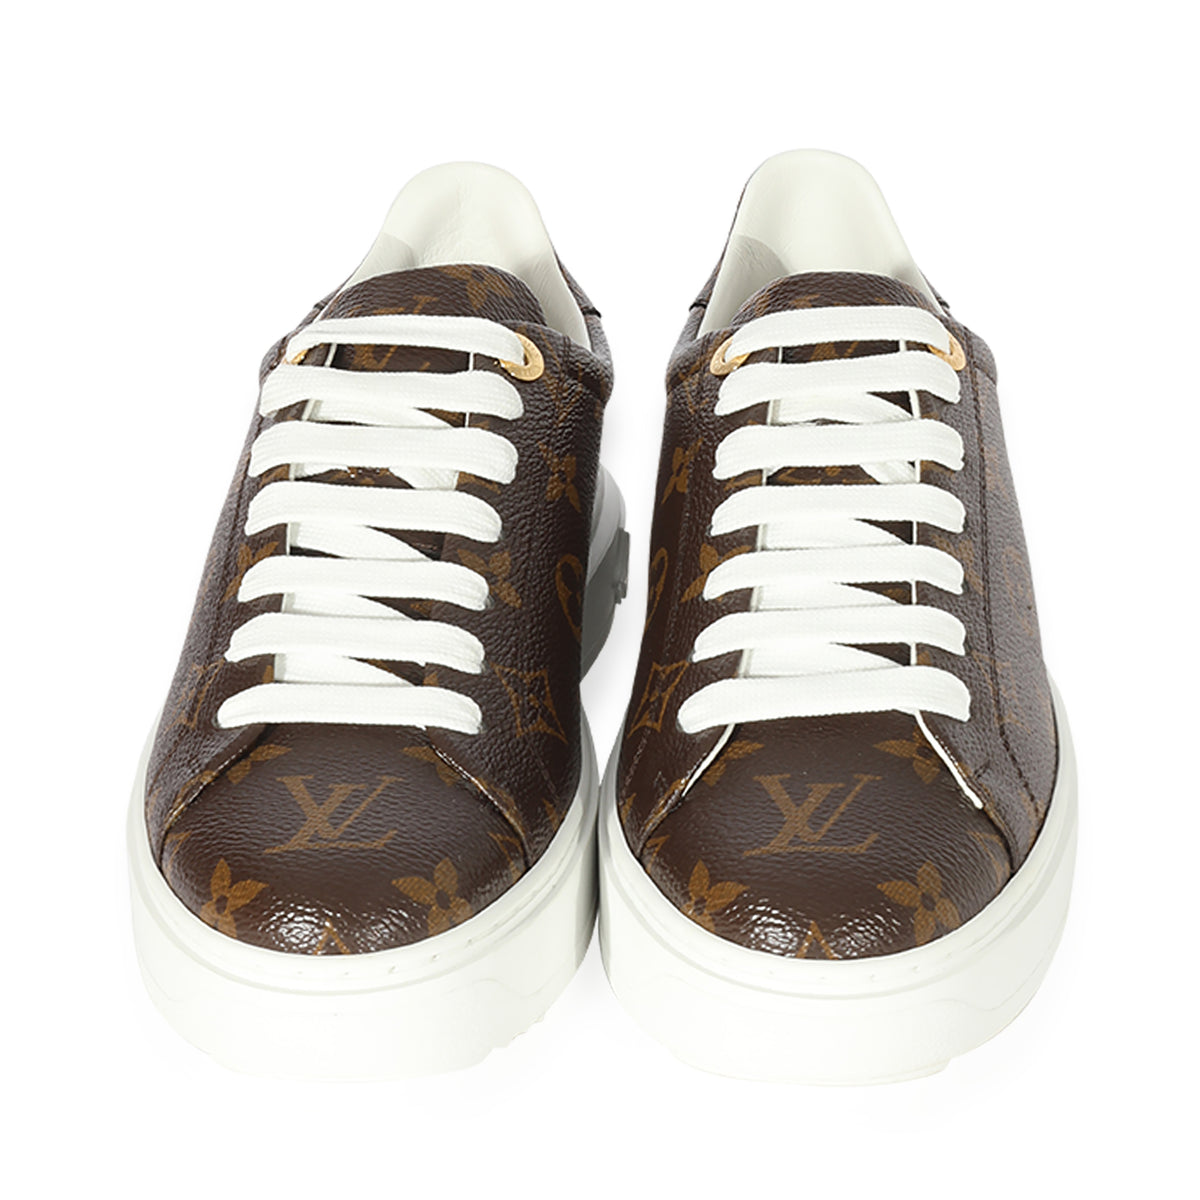 LOUIS VUITTON monogram Canvas Time Out sneakers 36 Made in Italy Cacao  brown